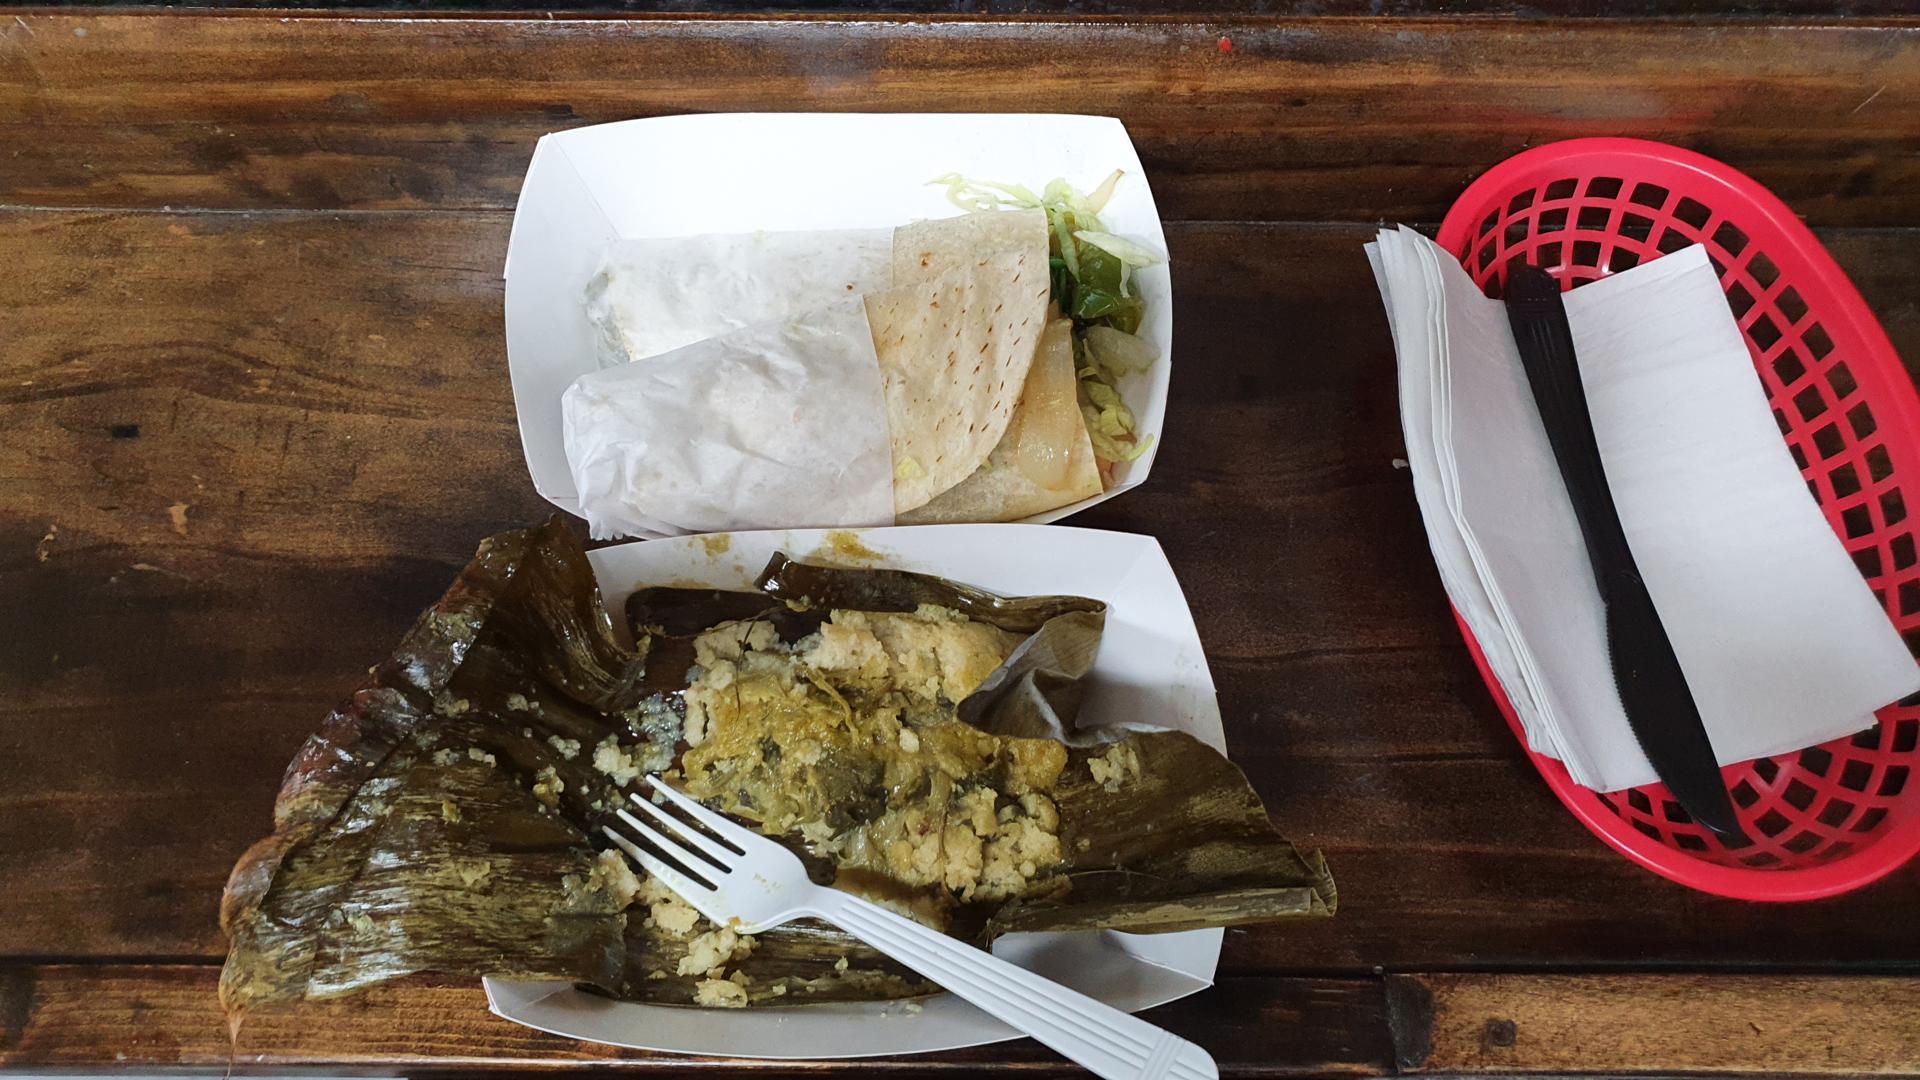 Vegan Mexican food at Downtown Bakery in East Village, New York